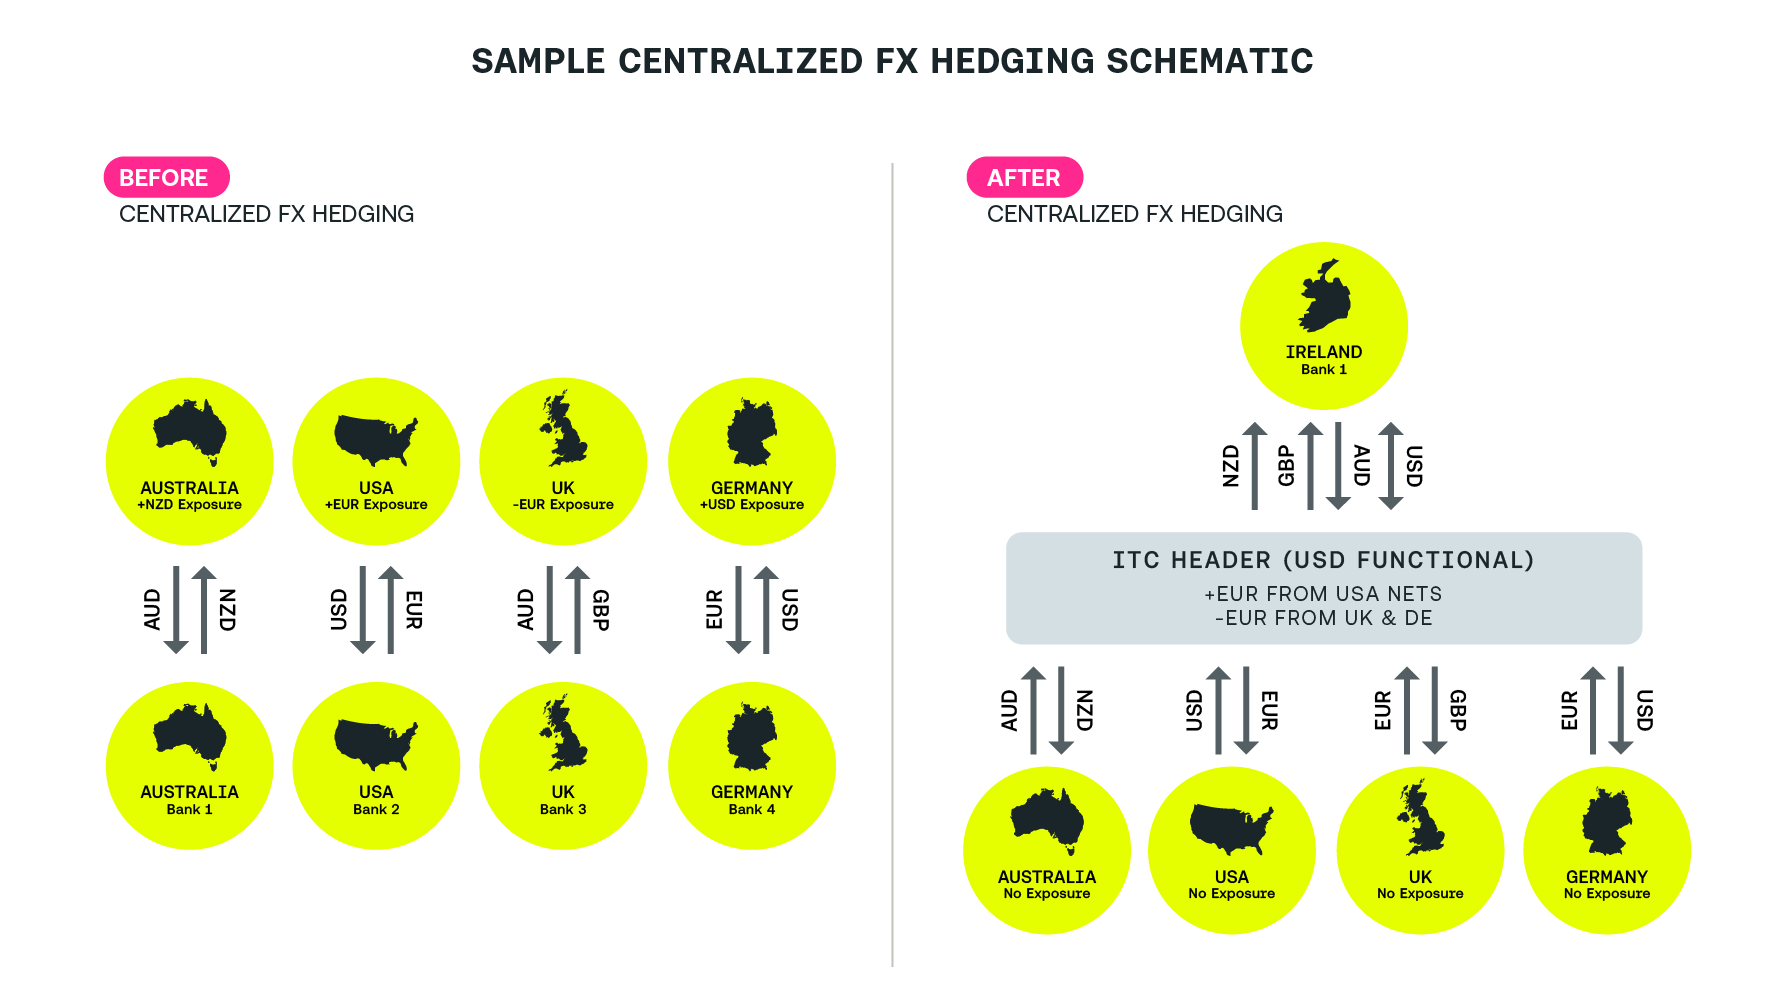 Sample Centralized FX Hedging Schematic